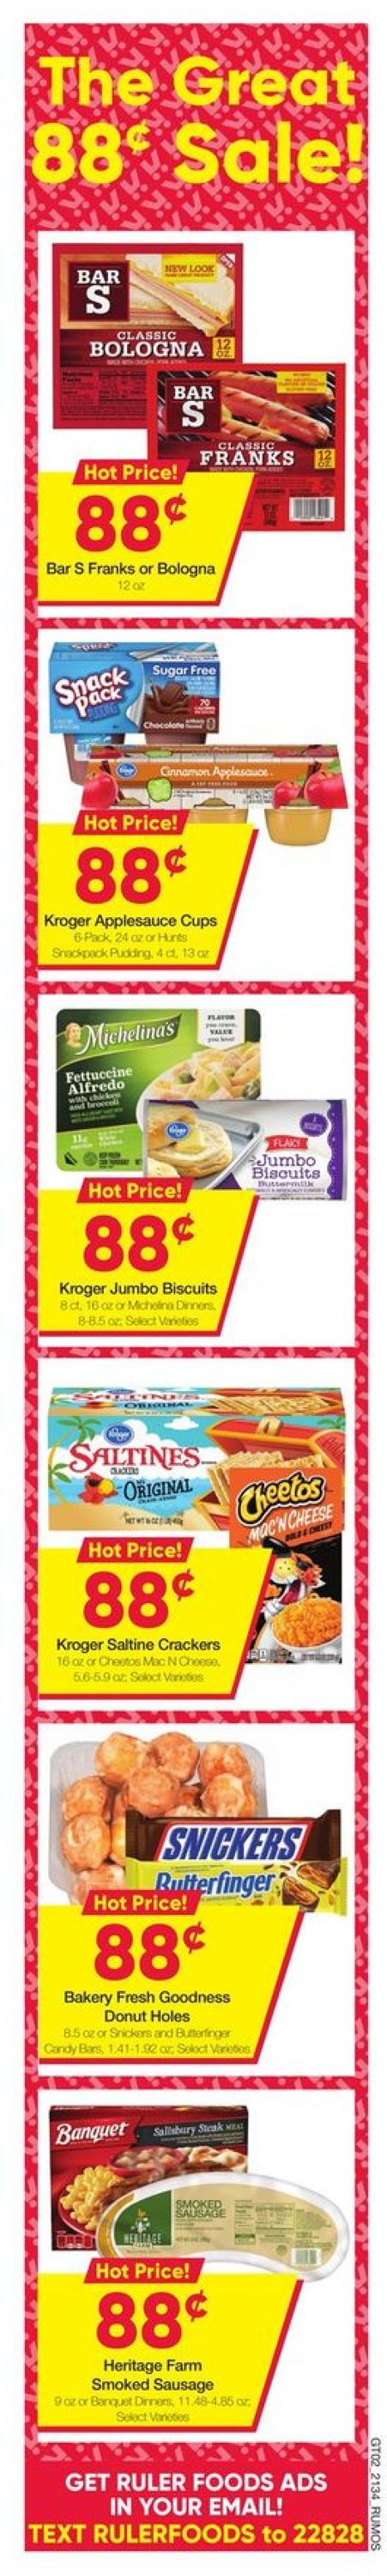 Catalogue Ruler Foods from 09/22/2021